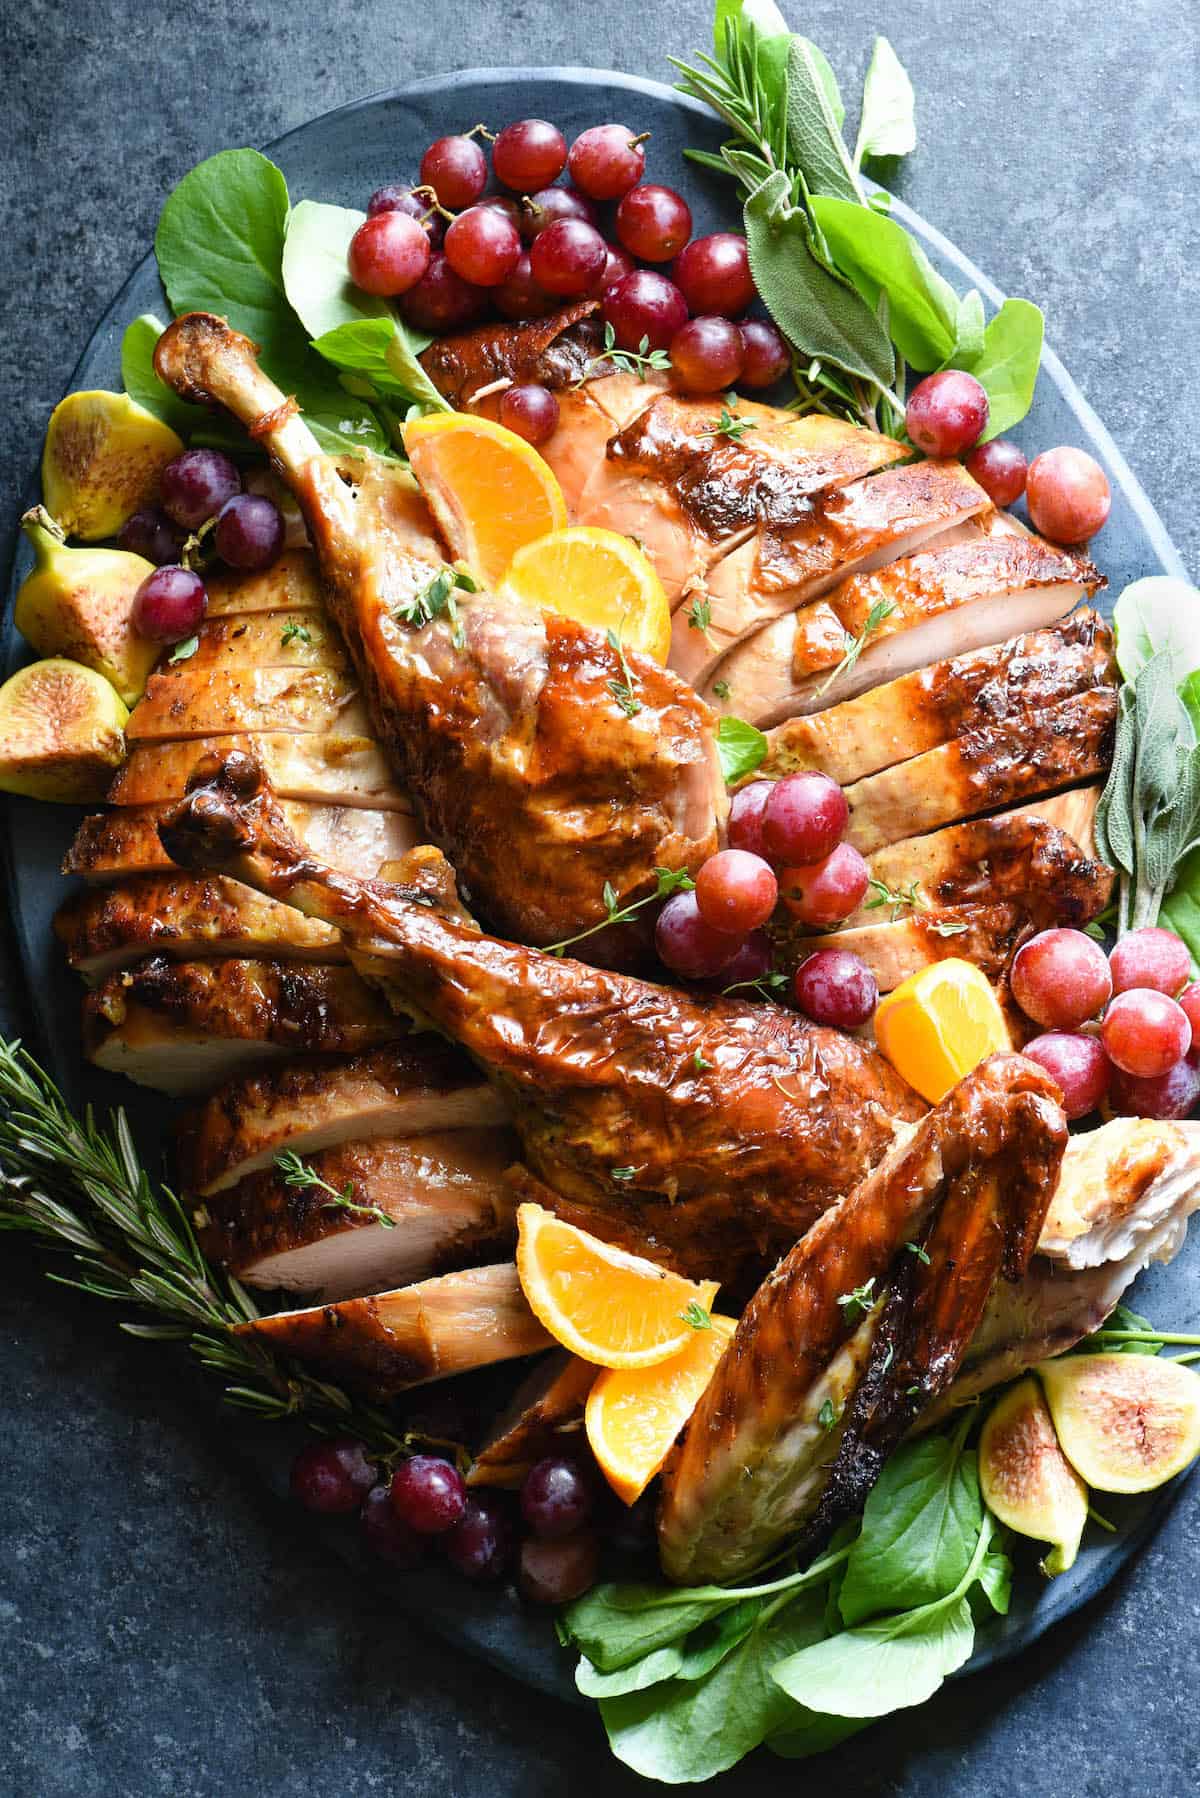 Large slate blue ceramic platter filled with a cut up roasted turkey, garnished with grapes, orange slices and herbs.